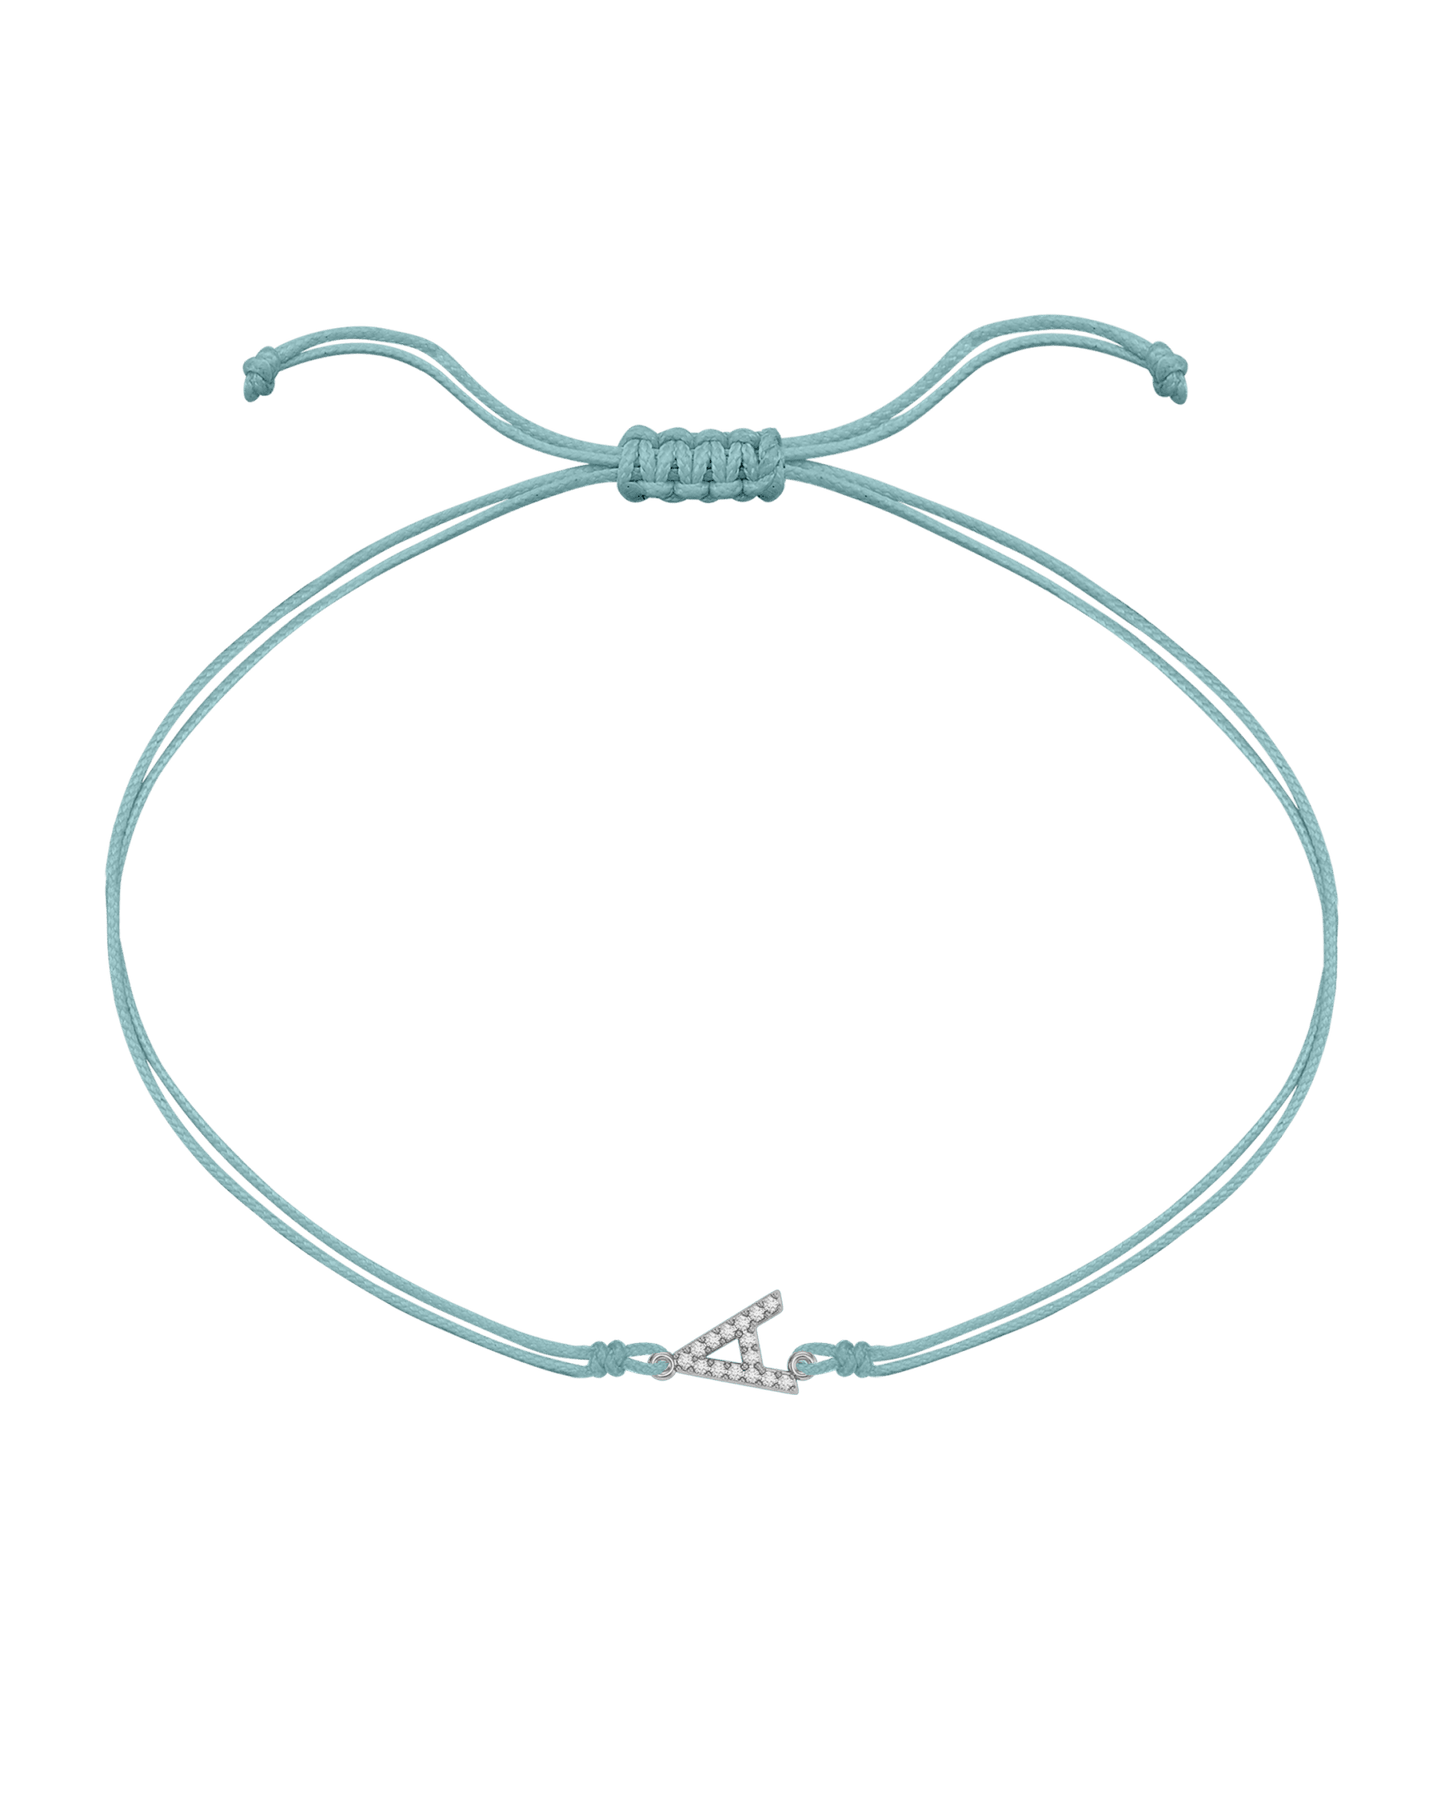 Paved Diamond Initial String of Love - 14K White Gold Bracelet 14K Solid Gold Turquoise 